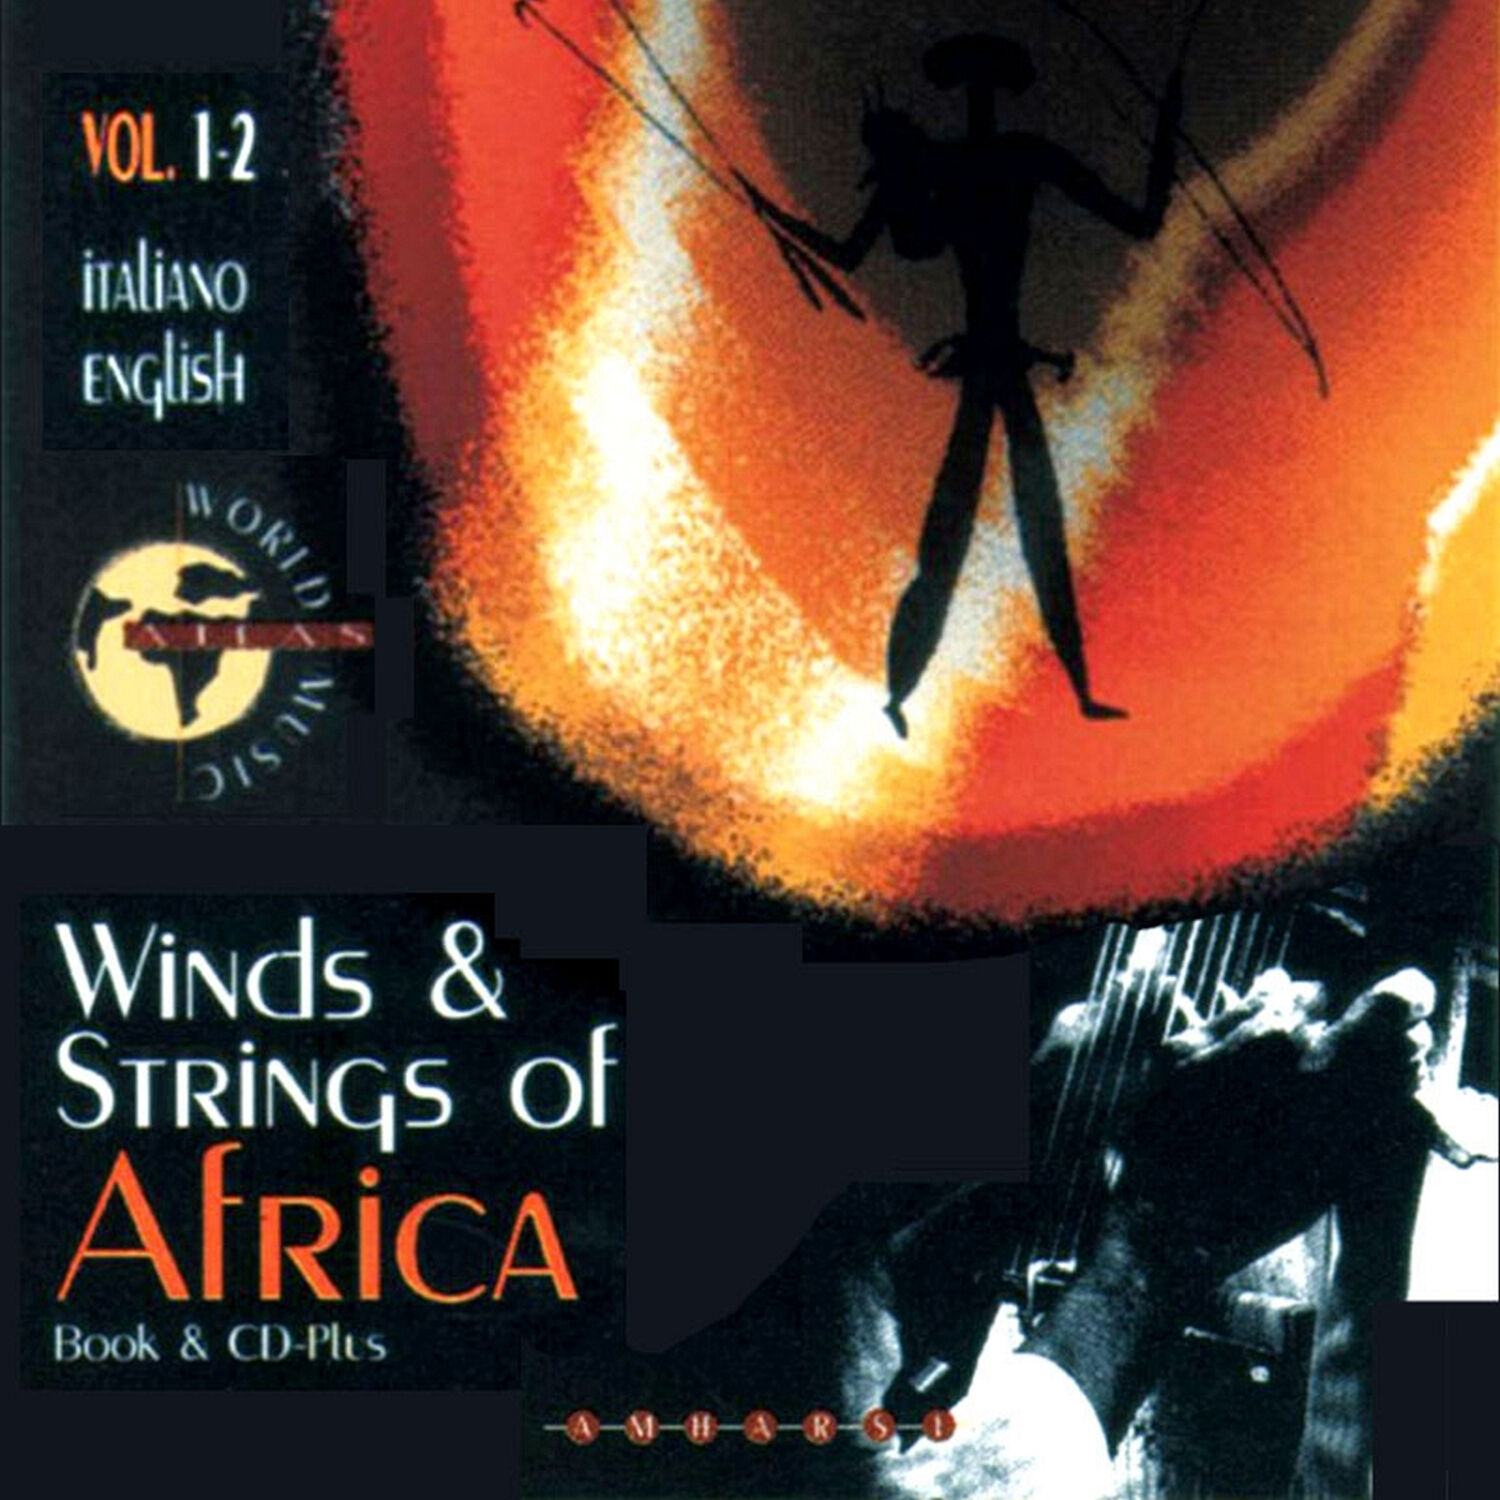 VA-Winds and Strings of Africa Vol 1 2-1997